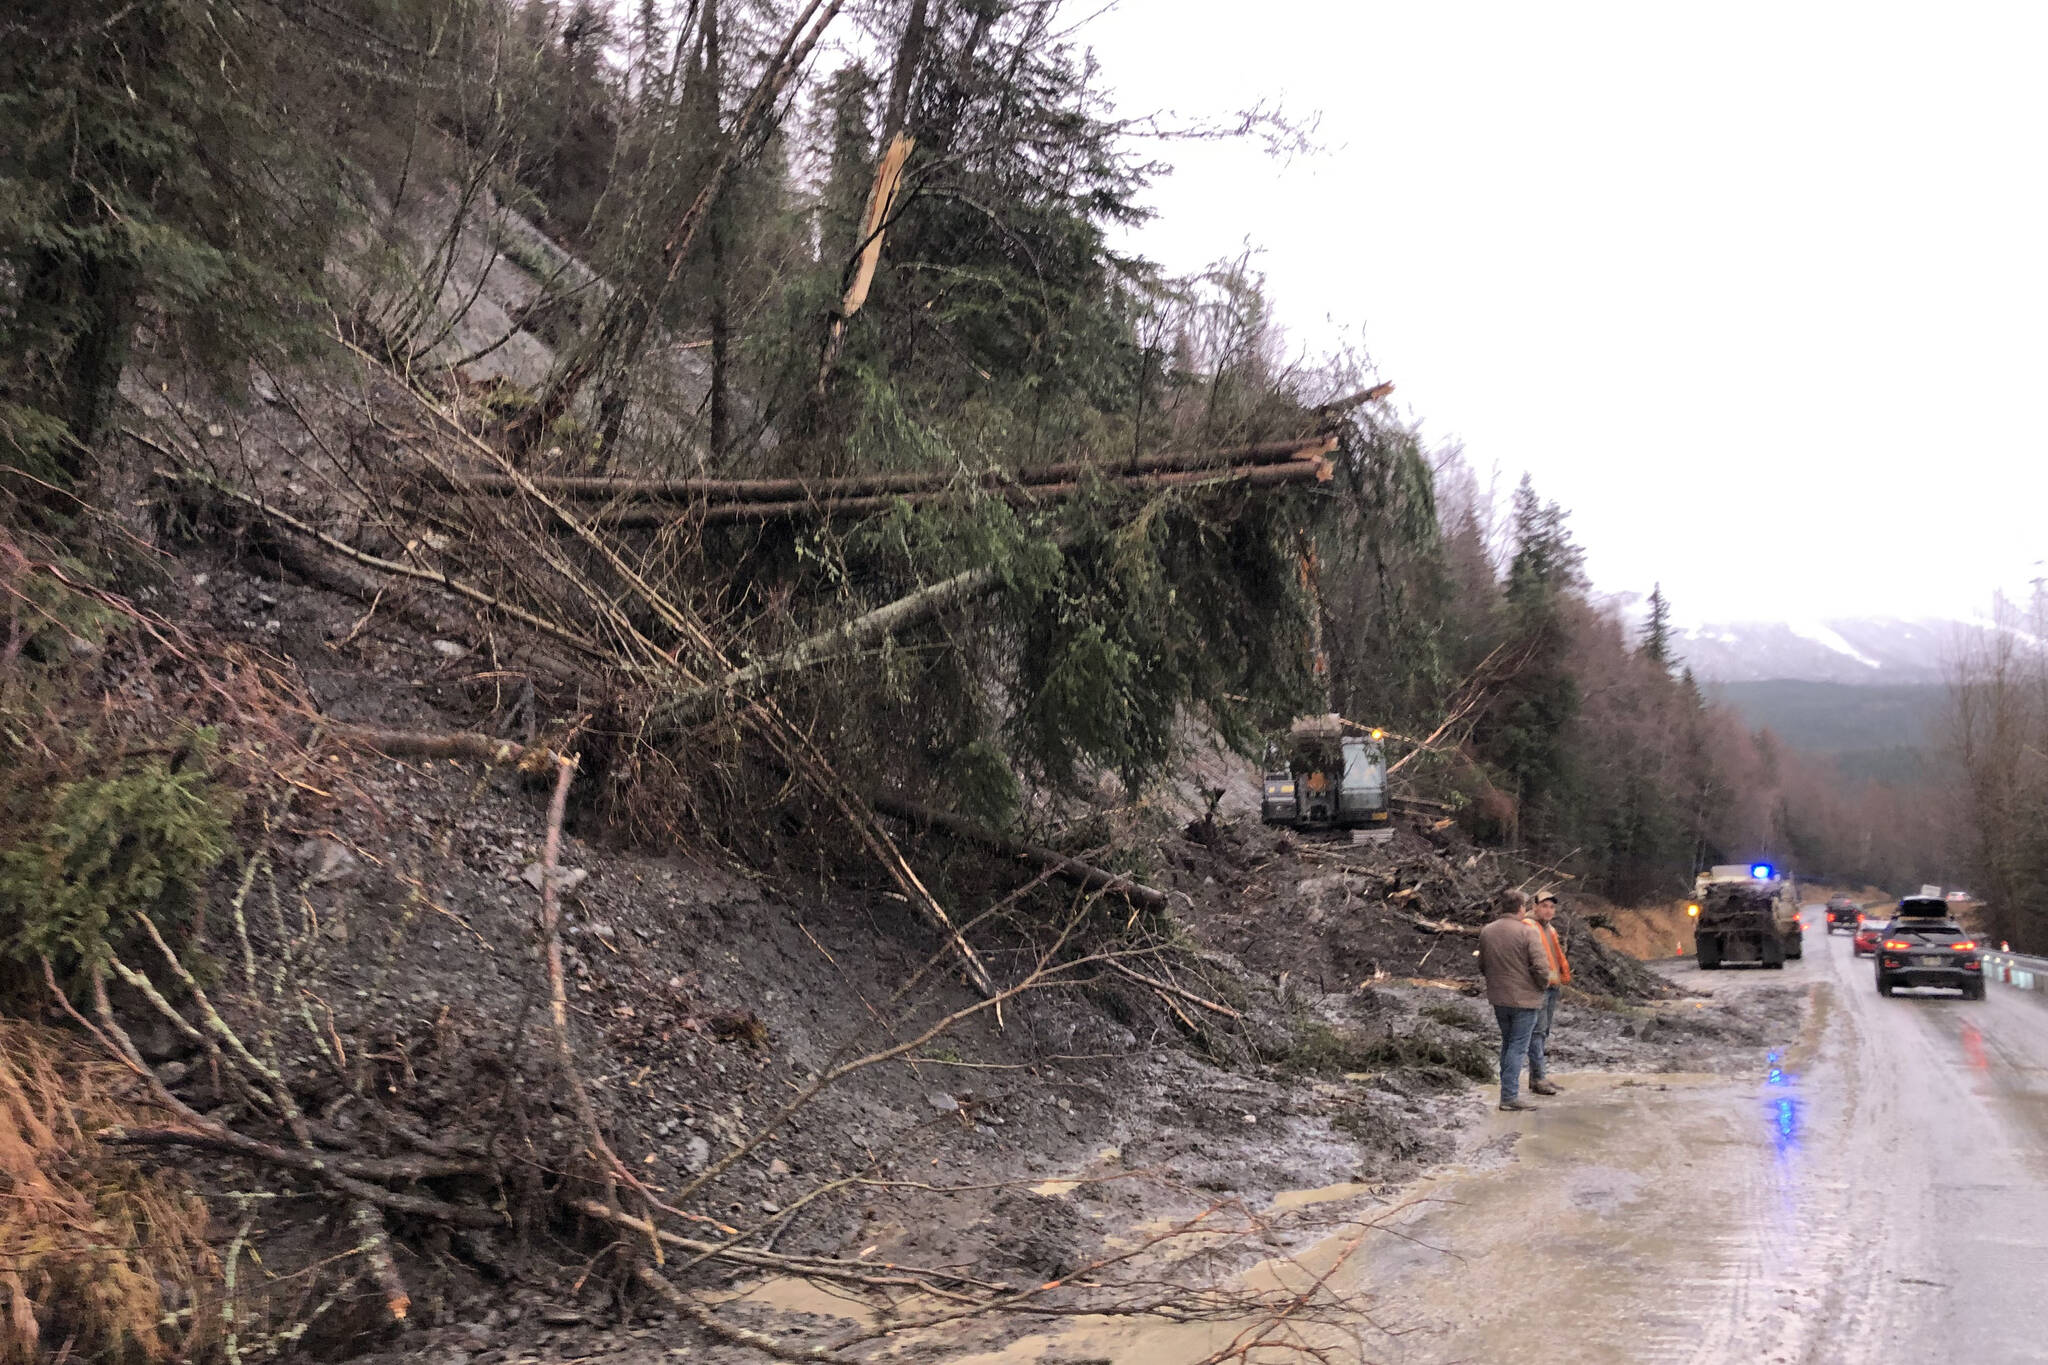 Debris is cleared on a section of the Sterling Highway on Monday, Nov. 1, 2021 near Cooper Landing, Alaska. A landslide on Sunday morning blocked both lanes of the highway, which had partially reopened Monday. (Camille Botello/Peninsula Clarion)